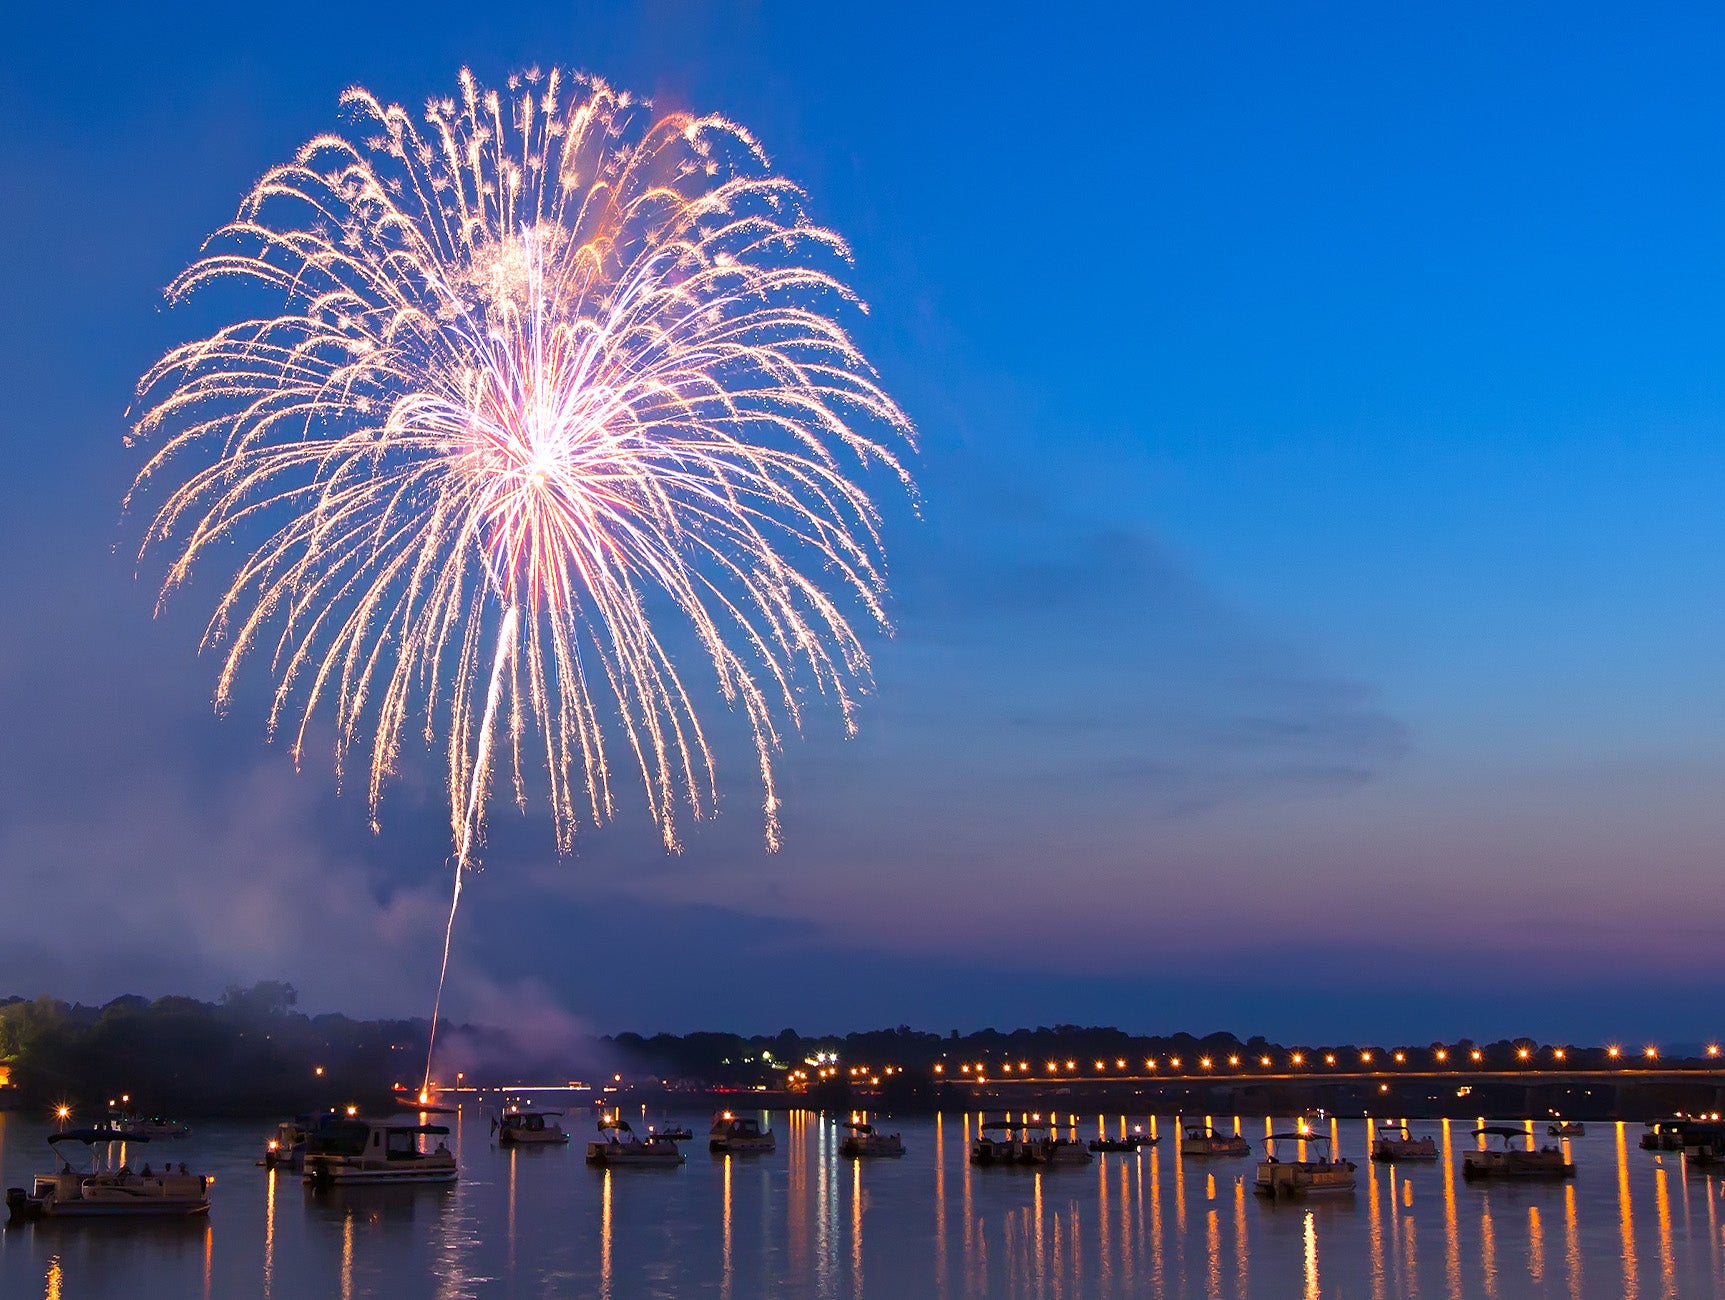 How to Enjoy a Fireworks Show from Your Boat